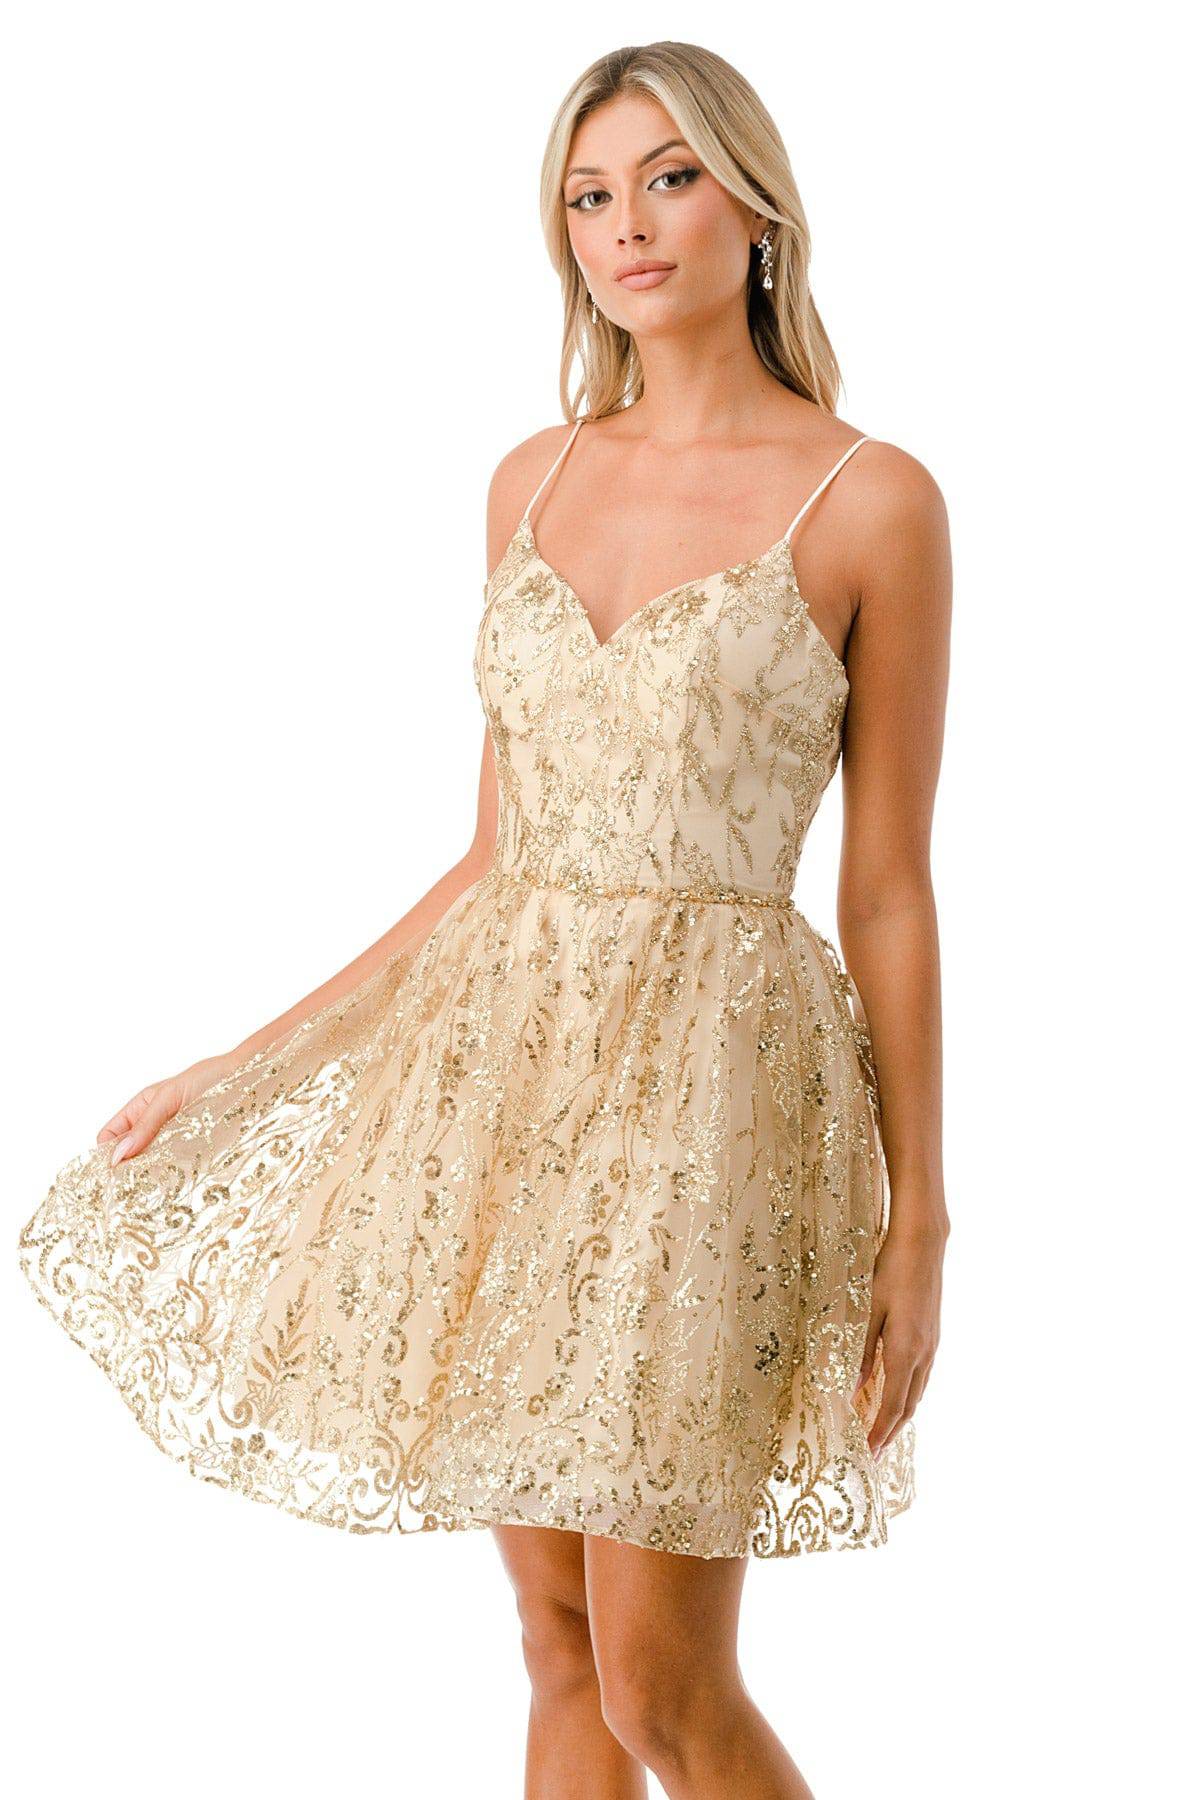 Aspeed S2756T Gold Floral Sequin Short Dress - NORMA REED